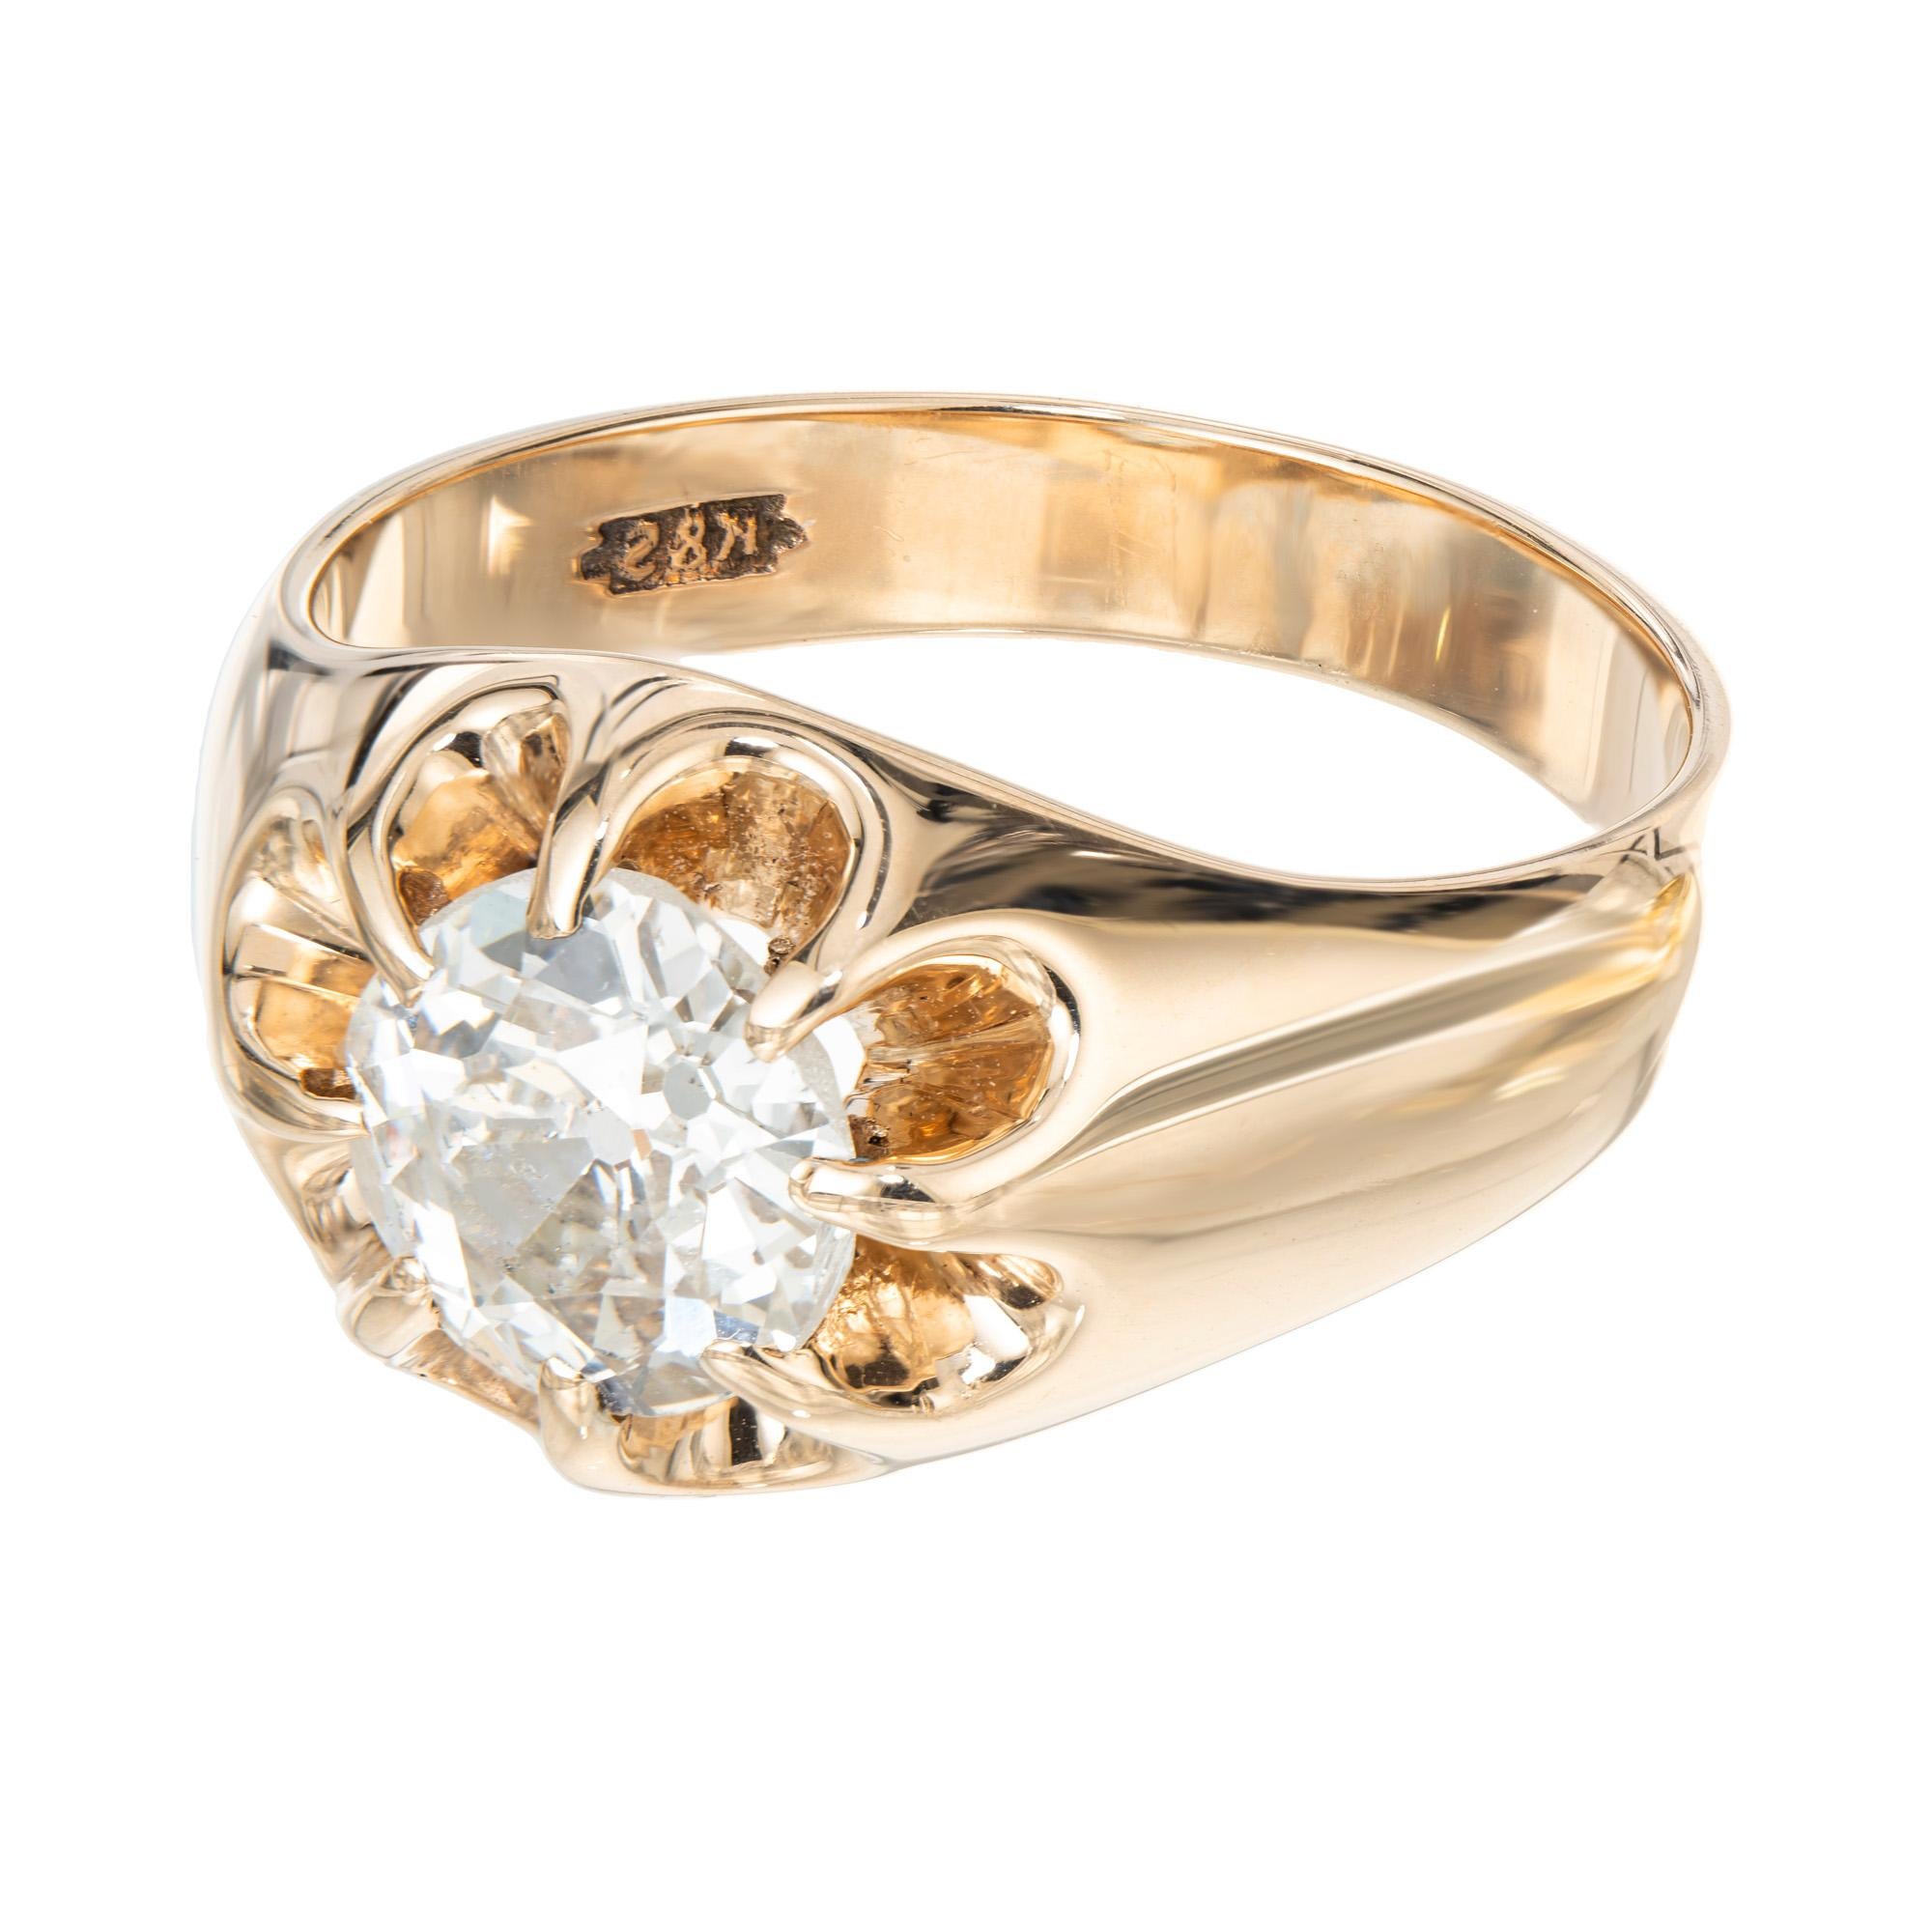 Original 1920's Art Deco handmade men's diamond ring. EGL certified Old European cut 1.65ct center diamond mounted in a 8 prong 14ct rose gold gypsy setting. EGL Certified as F-G colorless or near to colorless. This is on the lighter side of rose